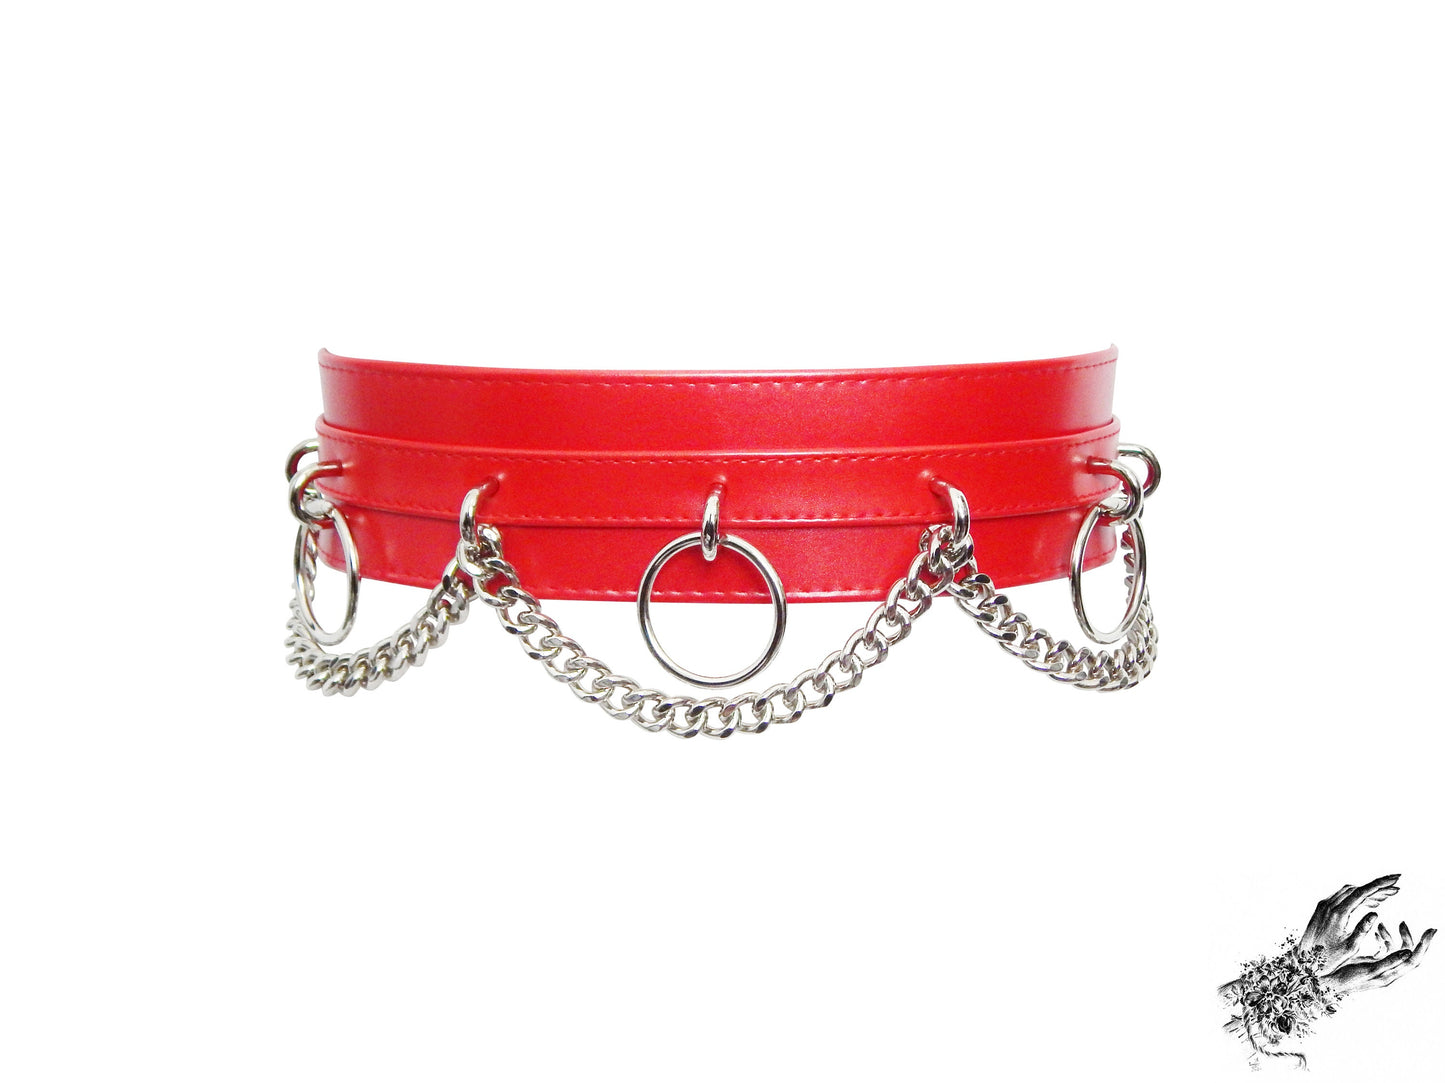 Red Vegan Leather O Ring and Chain Belt